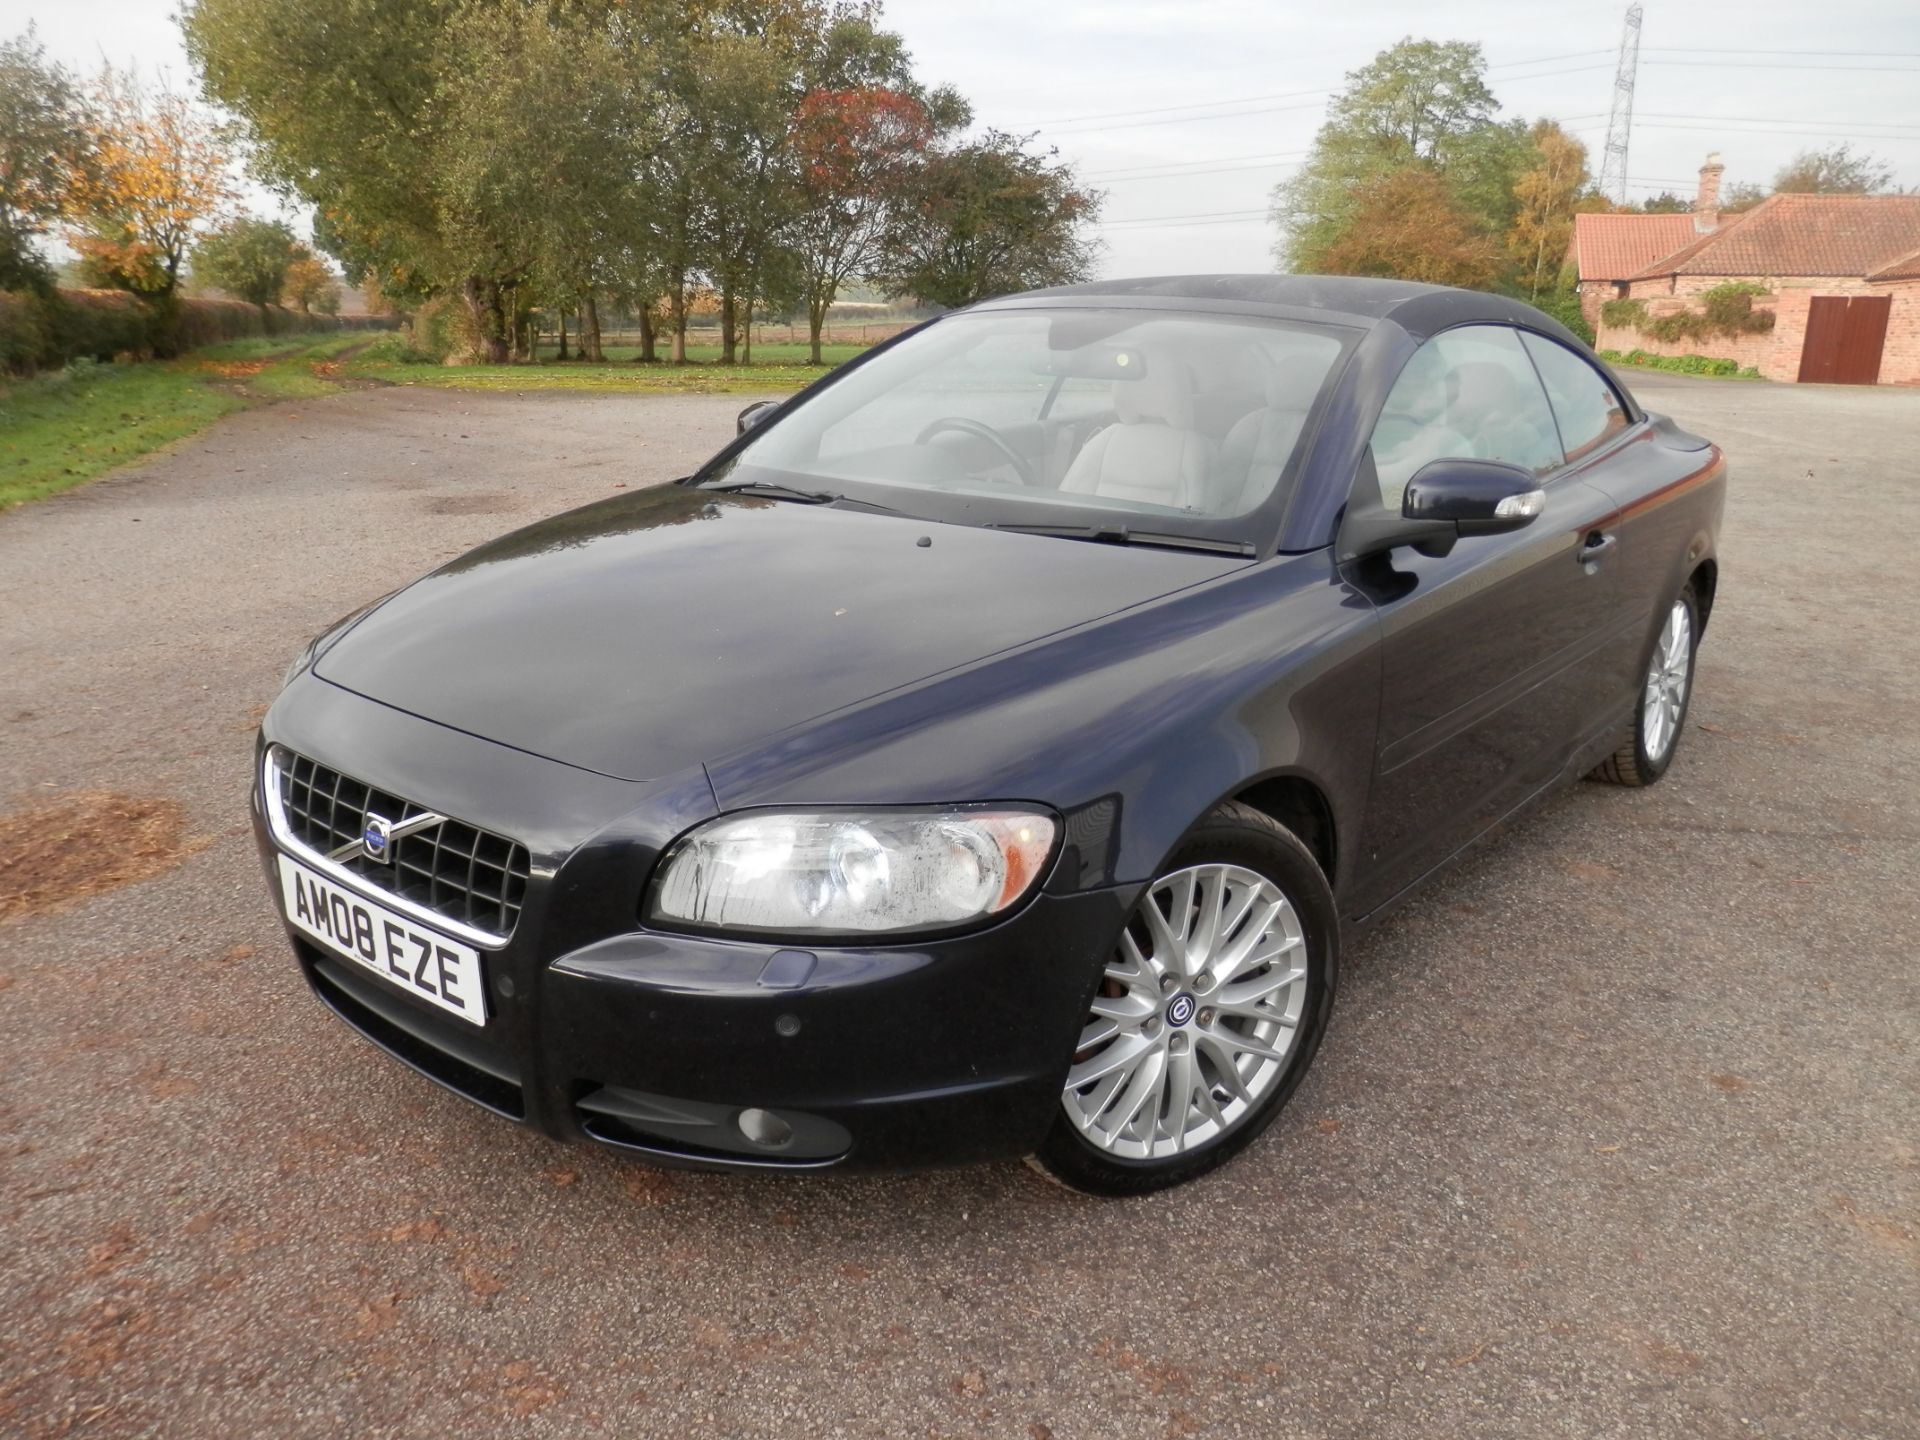 2008/08 VOLVO C70 SE LUX D5, DIESEL AUTO,CONVERTIBLE, MOT MAY 2017, ONLY 102K MILES, 180 BHP. - Image 20 of 57